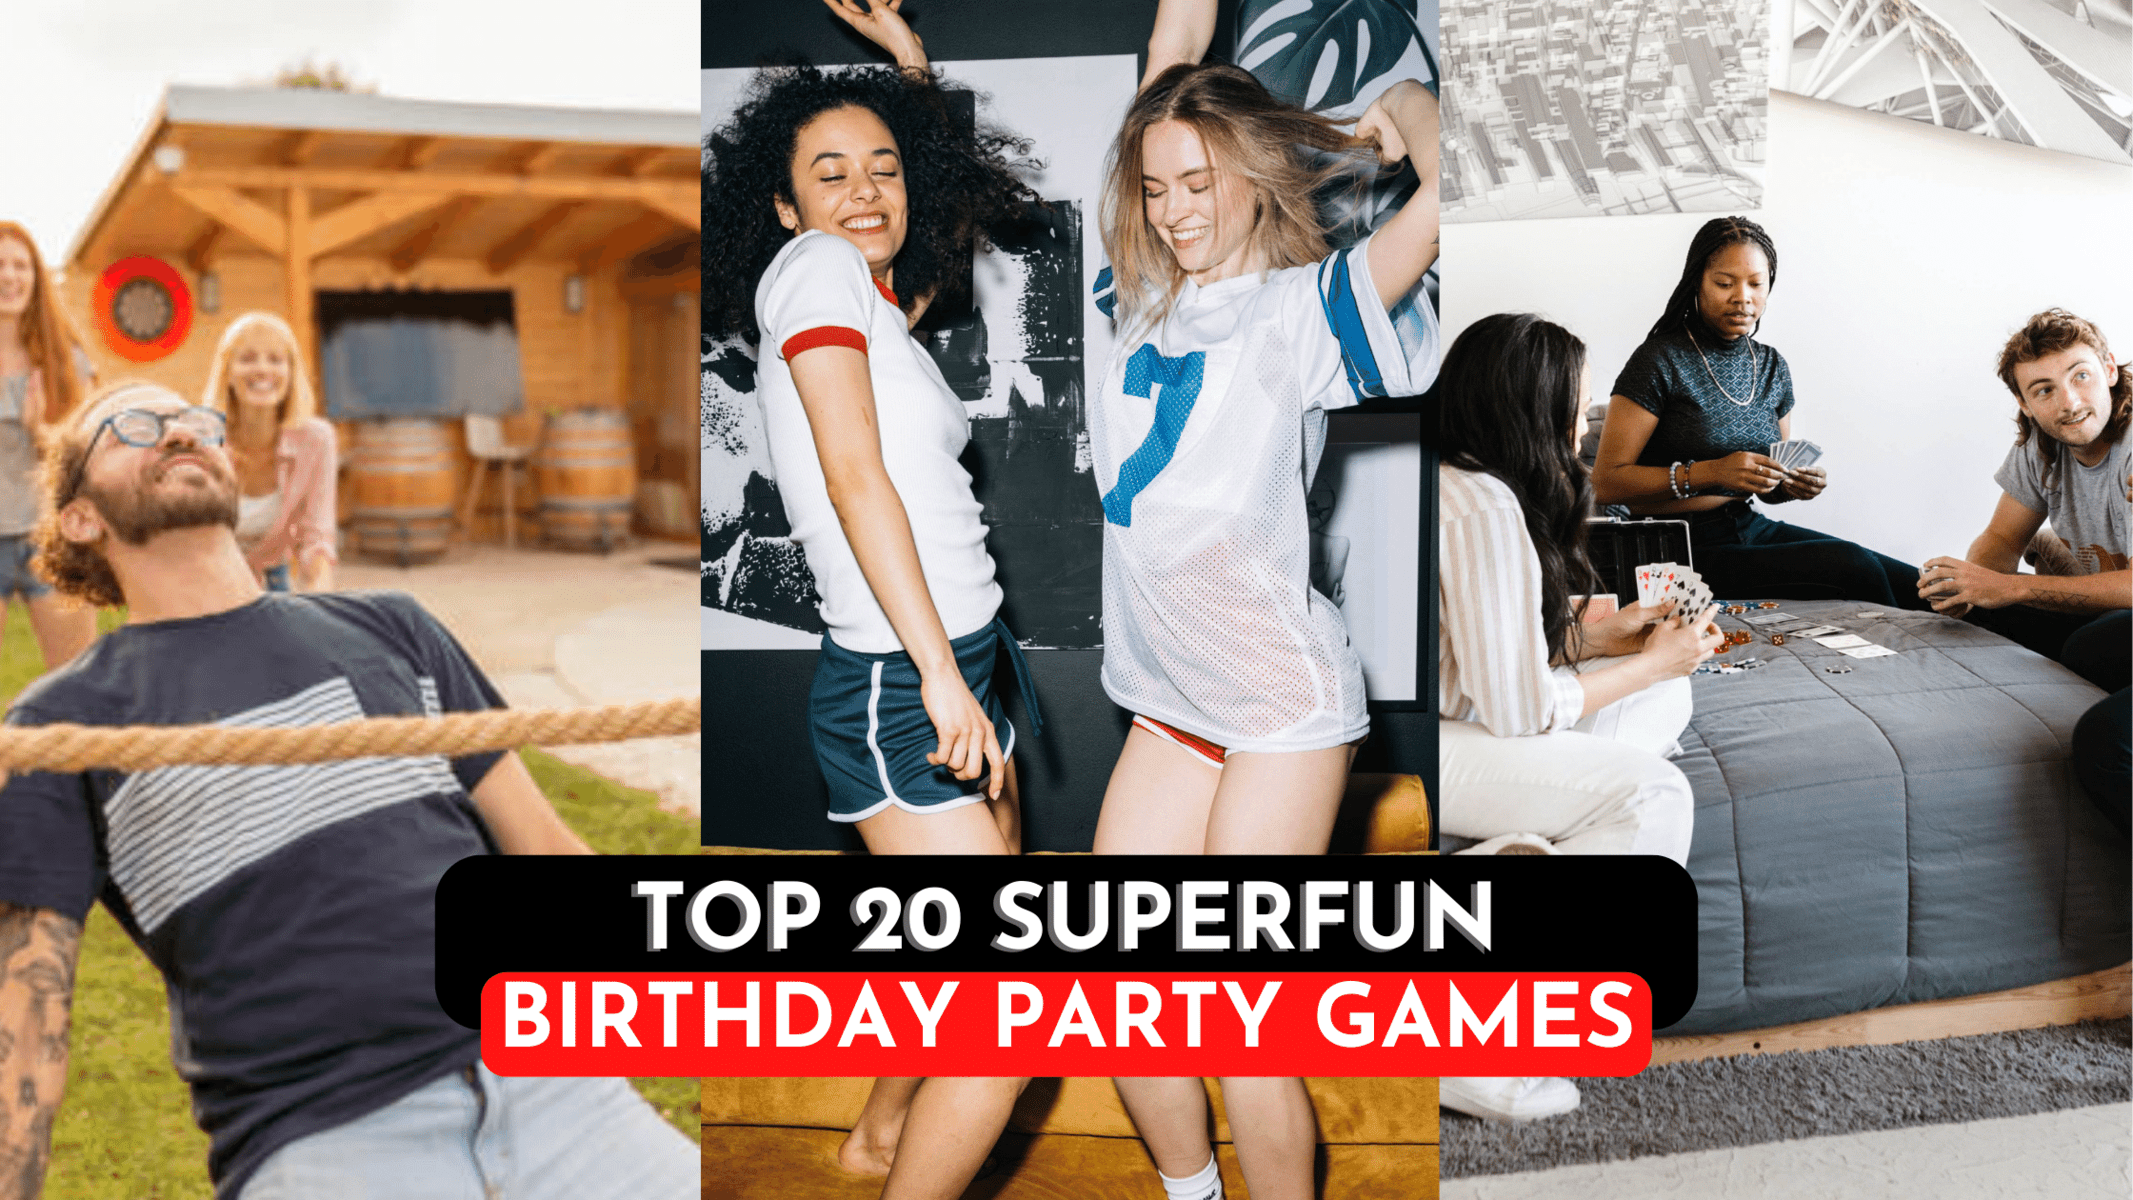 birthday party games feature